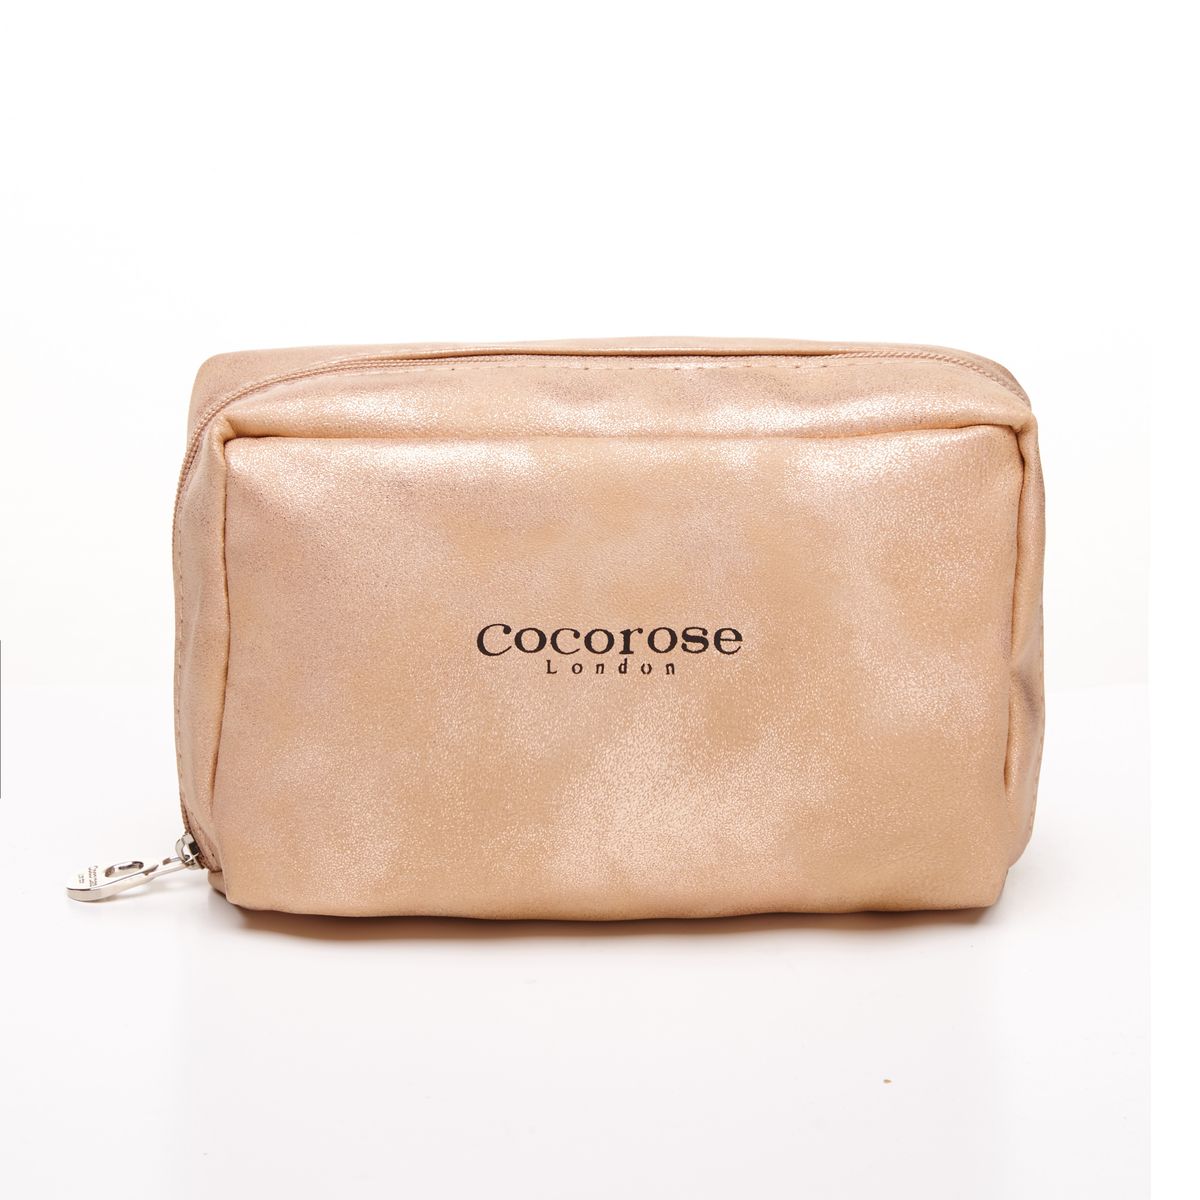 Barbican Rose Gold Ballerina Pumps Travel Purse by Cocorose London